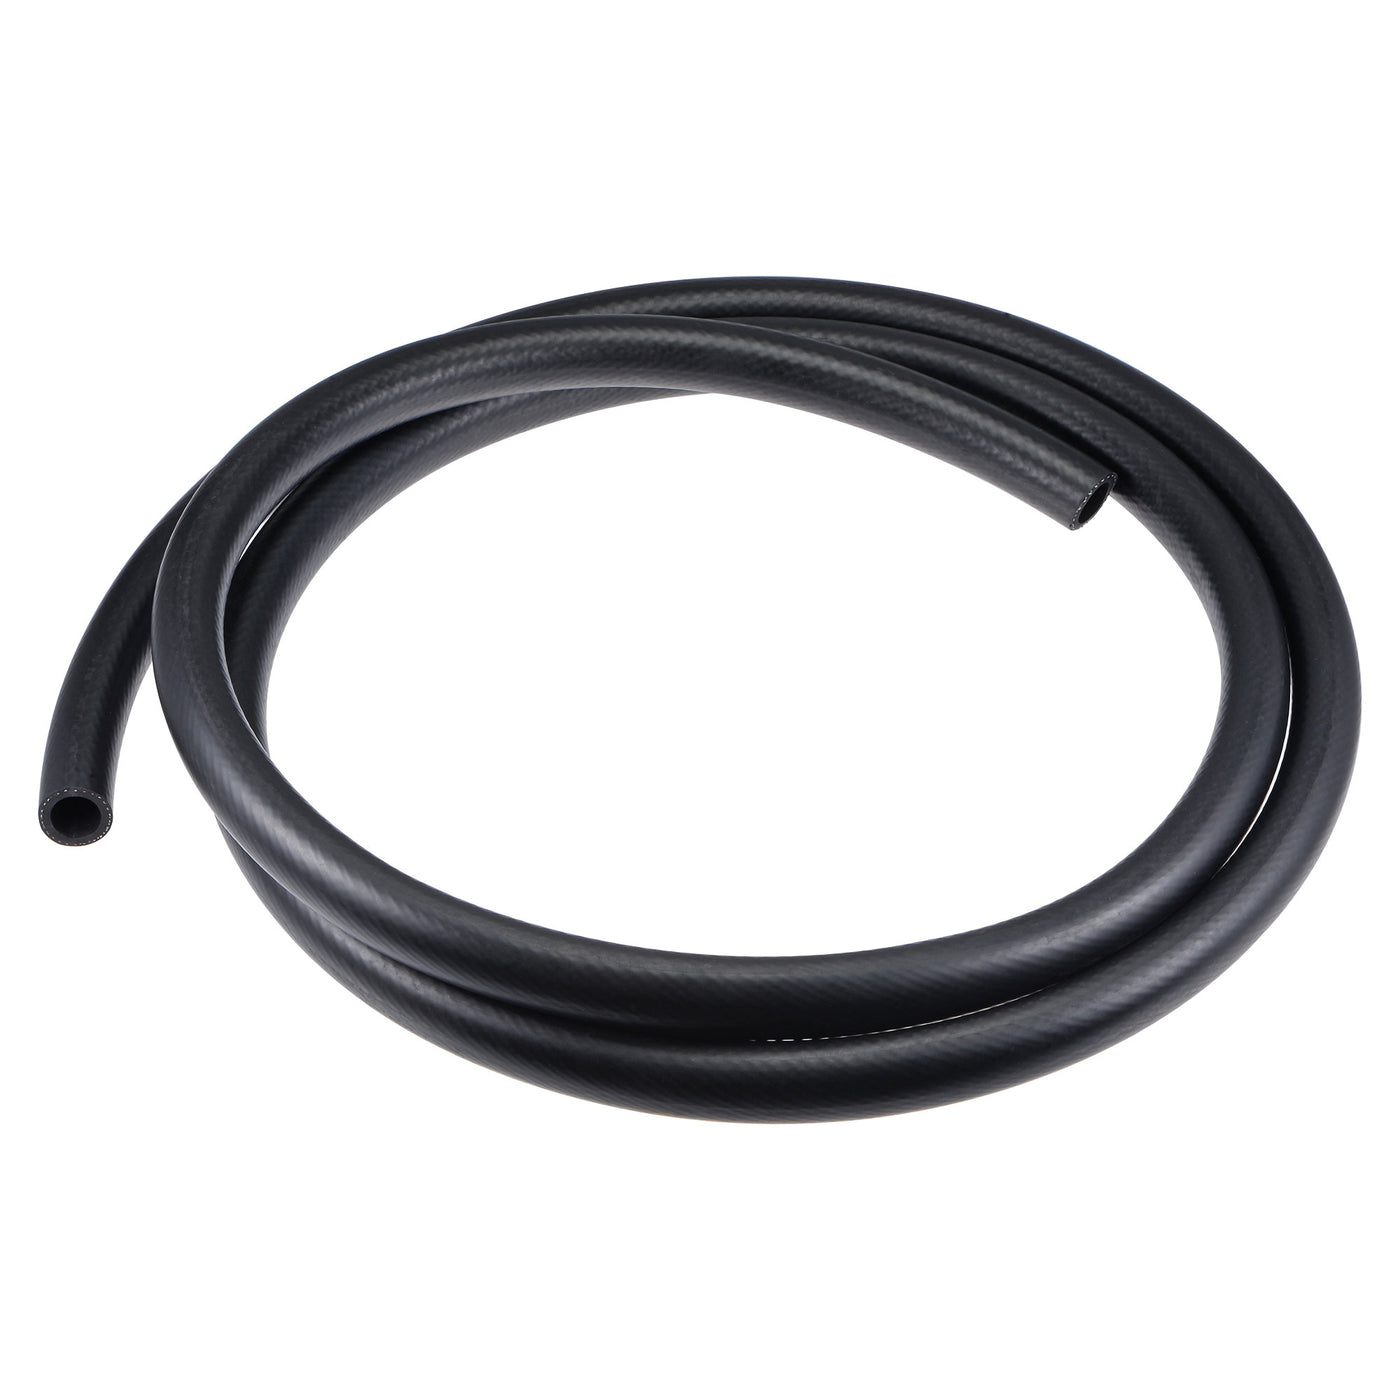 uxcell Uxcell Fuel Line Hose, Oil Tubing for Small Engines